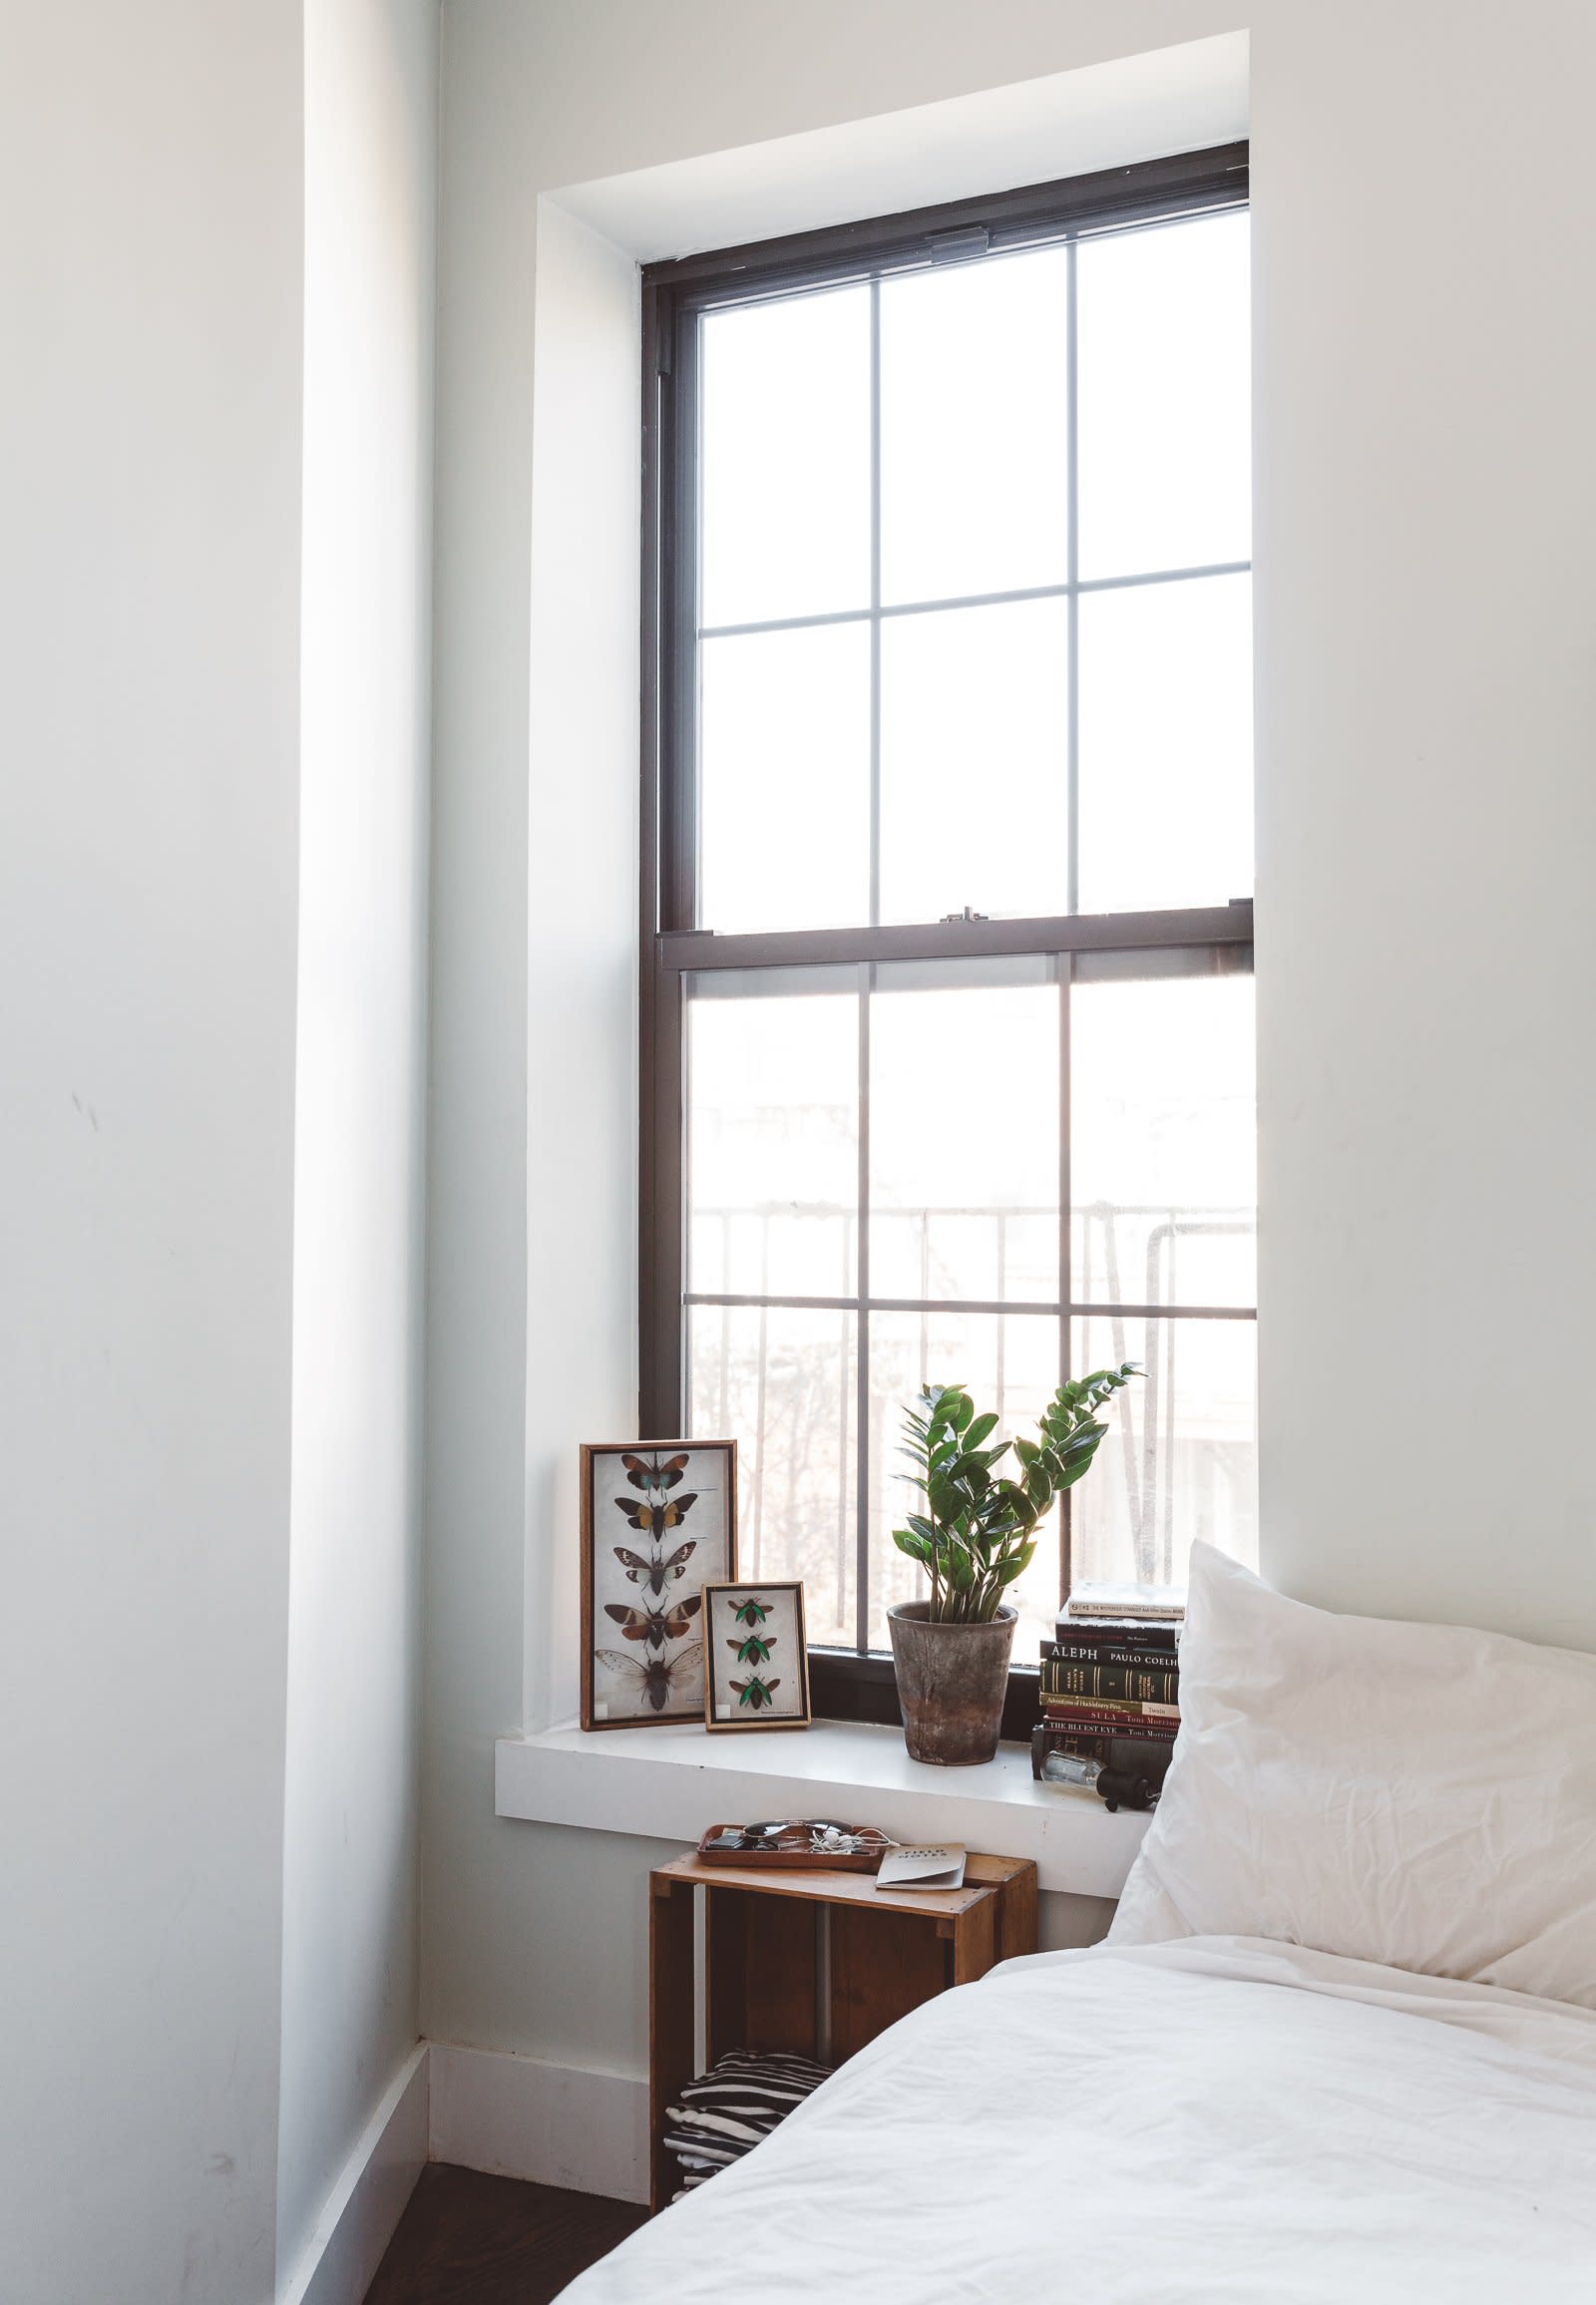 7 Creative Window Sill Ideas - Fun Ways to Dress Up Your Window Sill |  Apartment Therapy